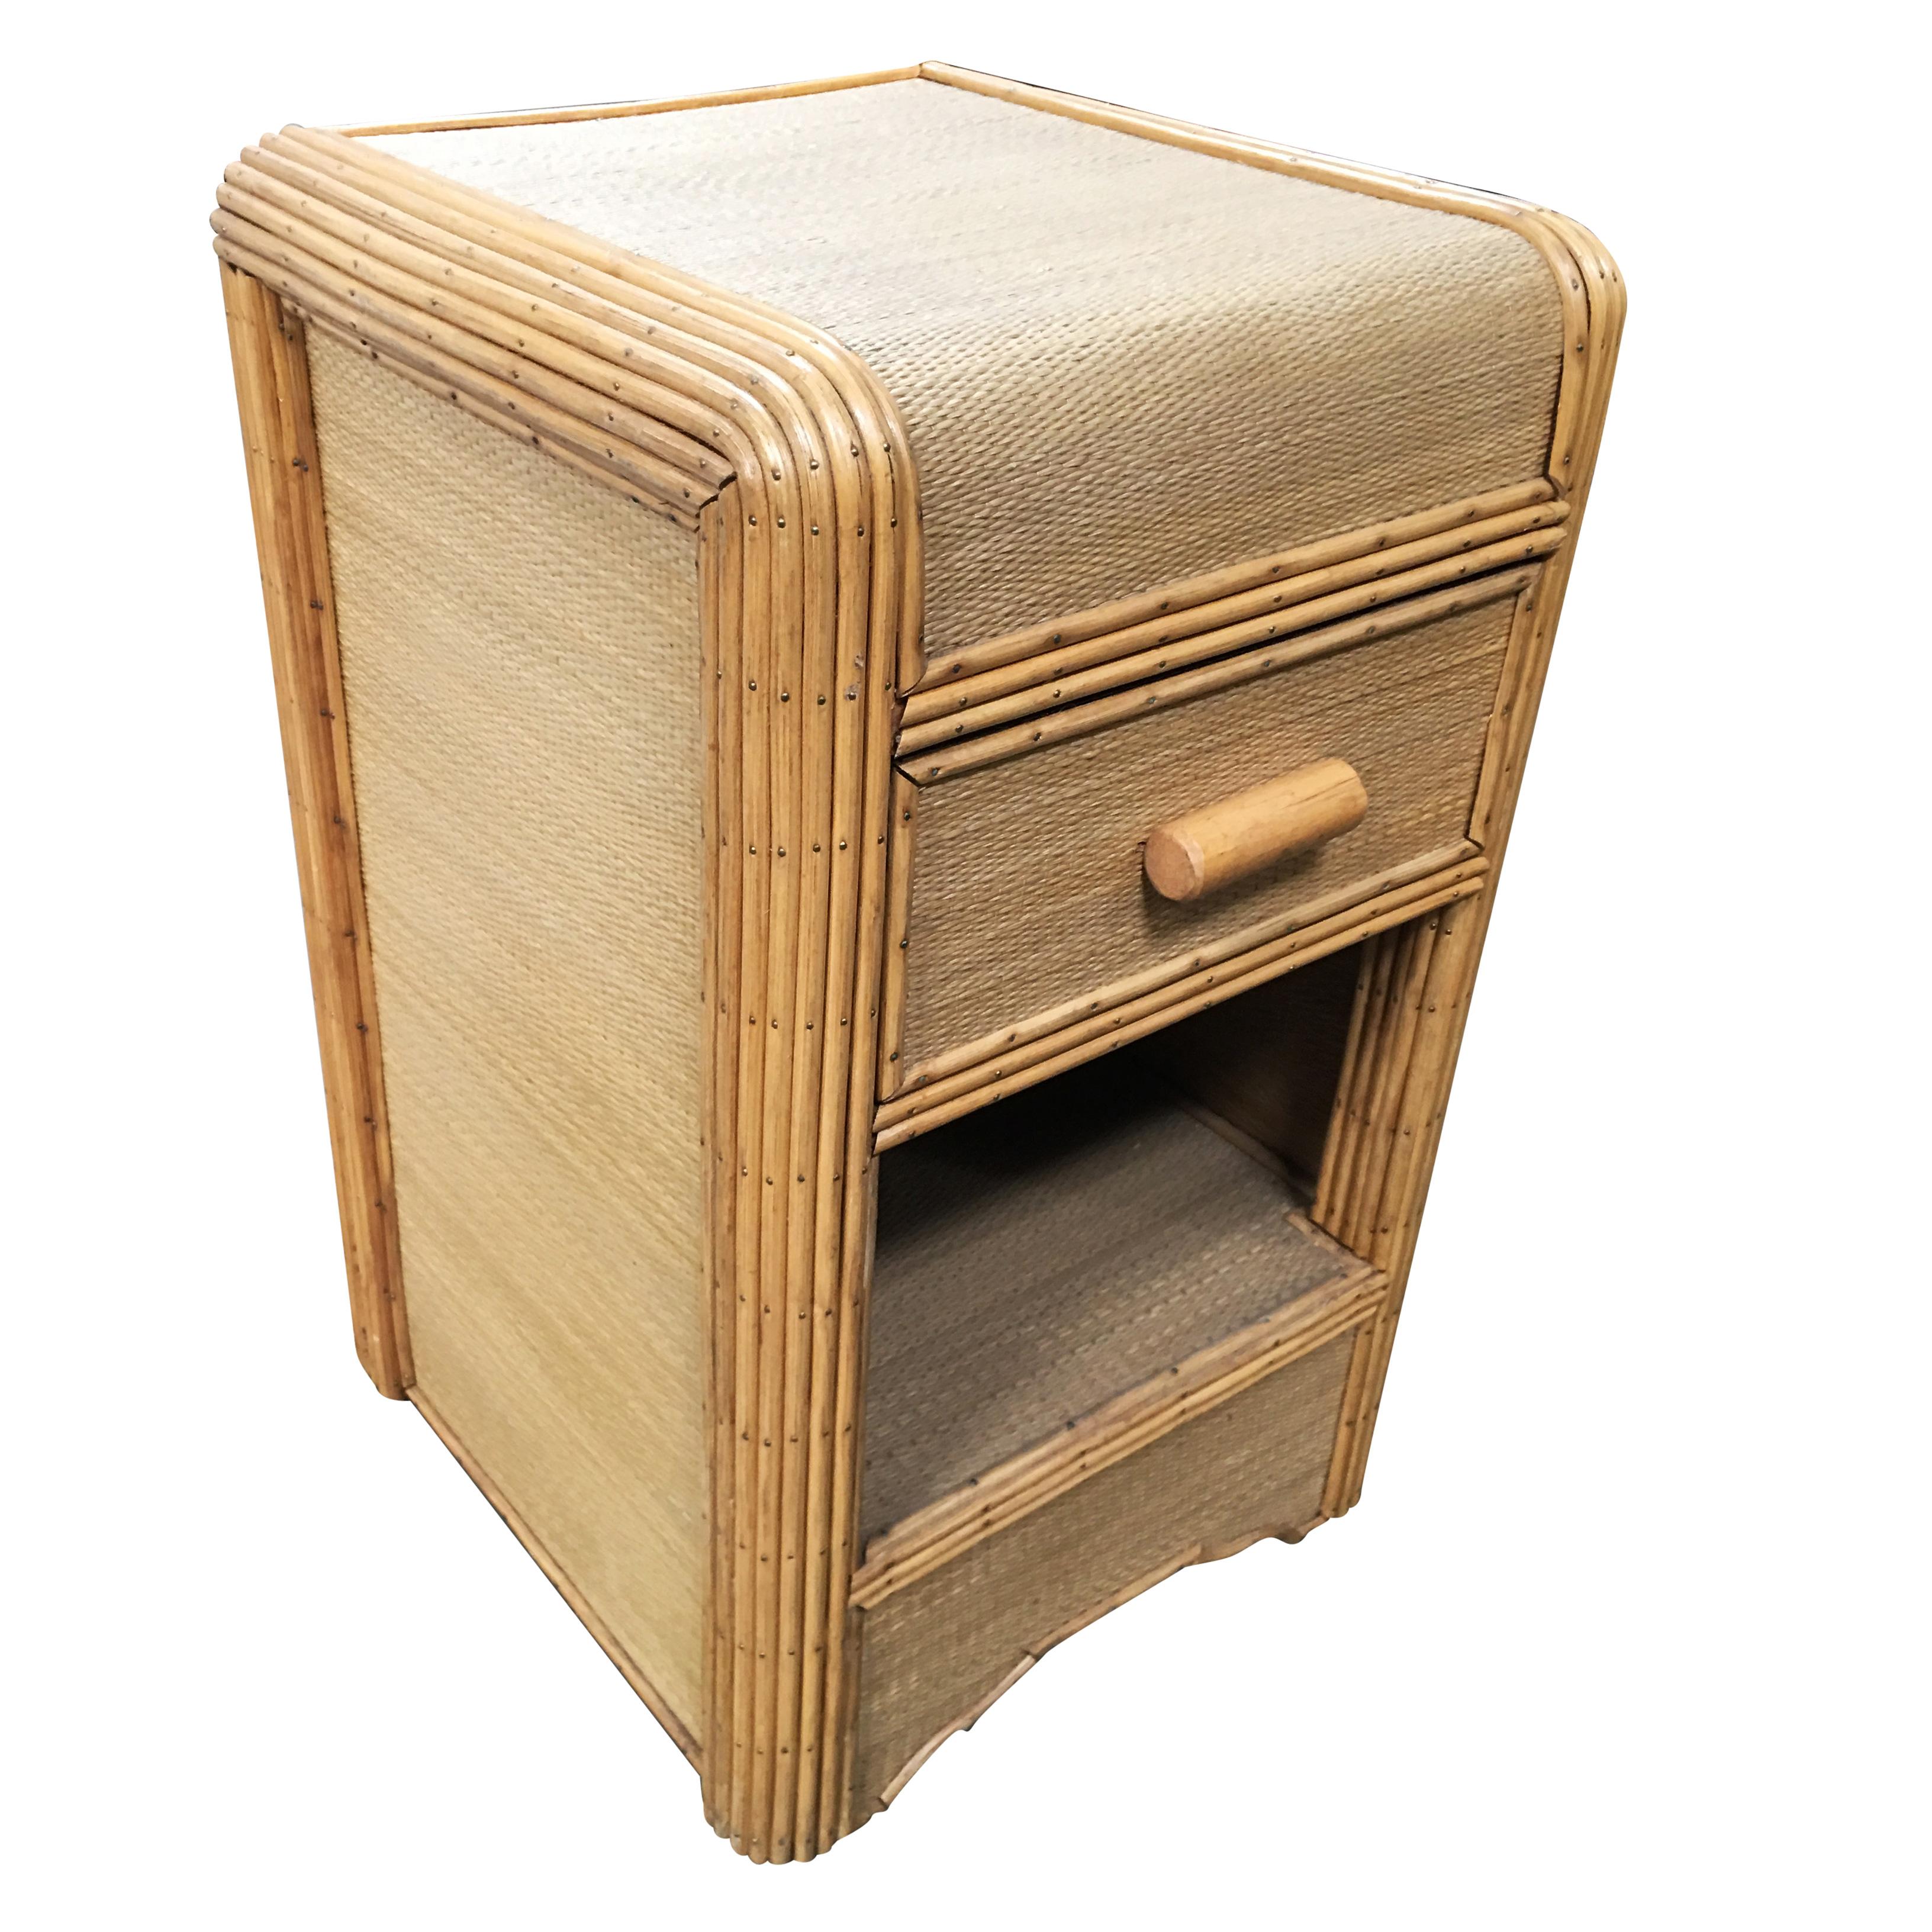 Streamline stick rattan side table nightstand with grass-mat coverings, edges are finished with brass nails.

Restored to new for you.

All rattan, bamboo and wicker furniture has been painstakingly refurbished to the highest standards with the best